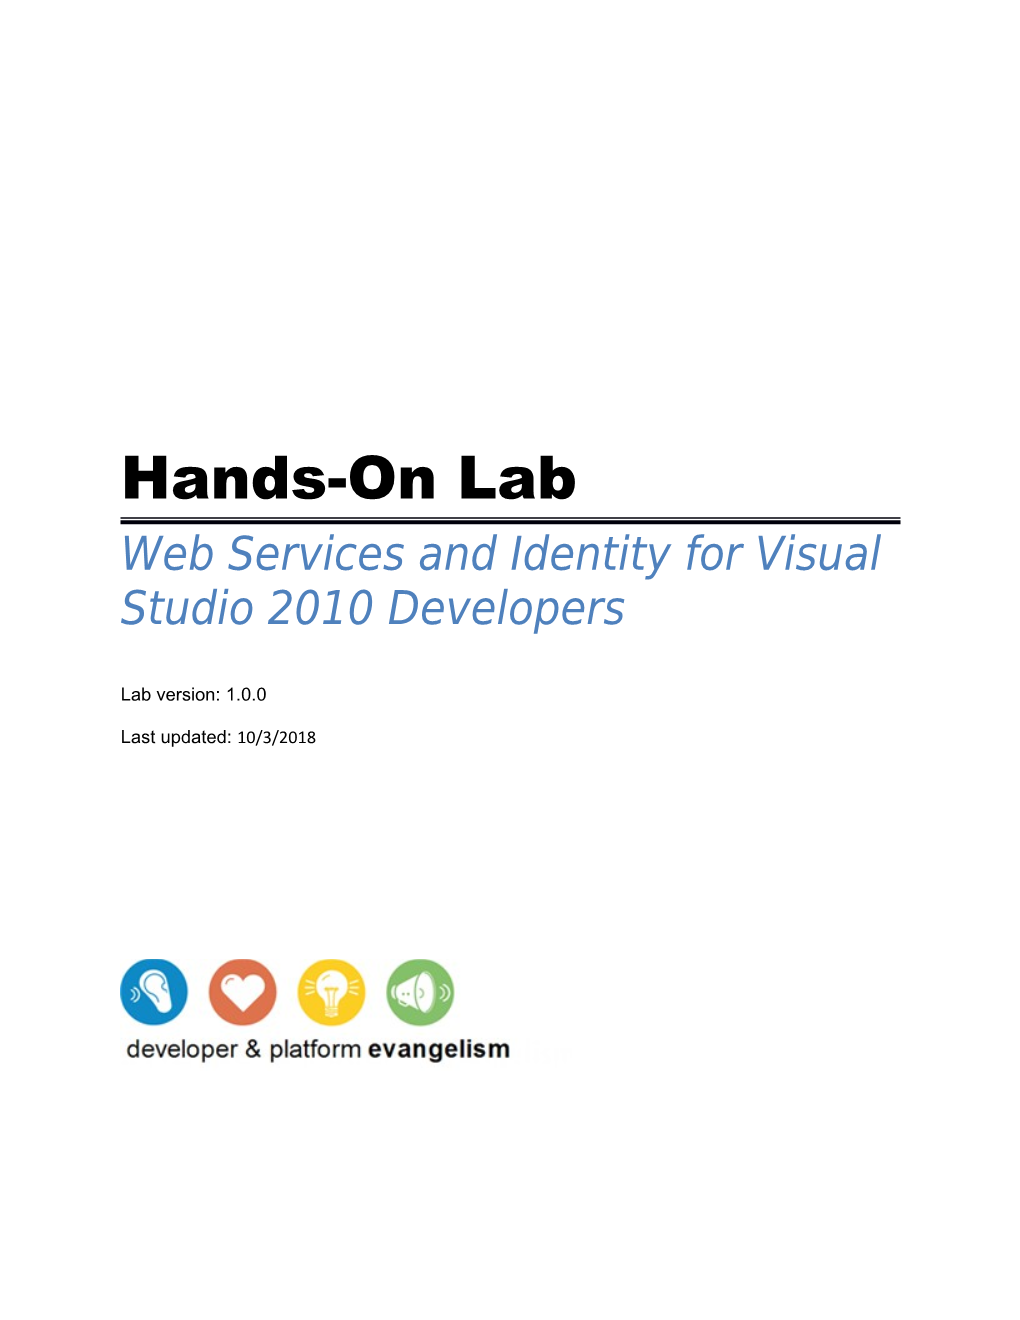 Web Services and Identity for Visual Studio 2010 Developers